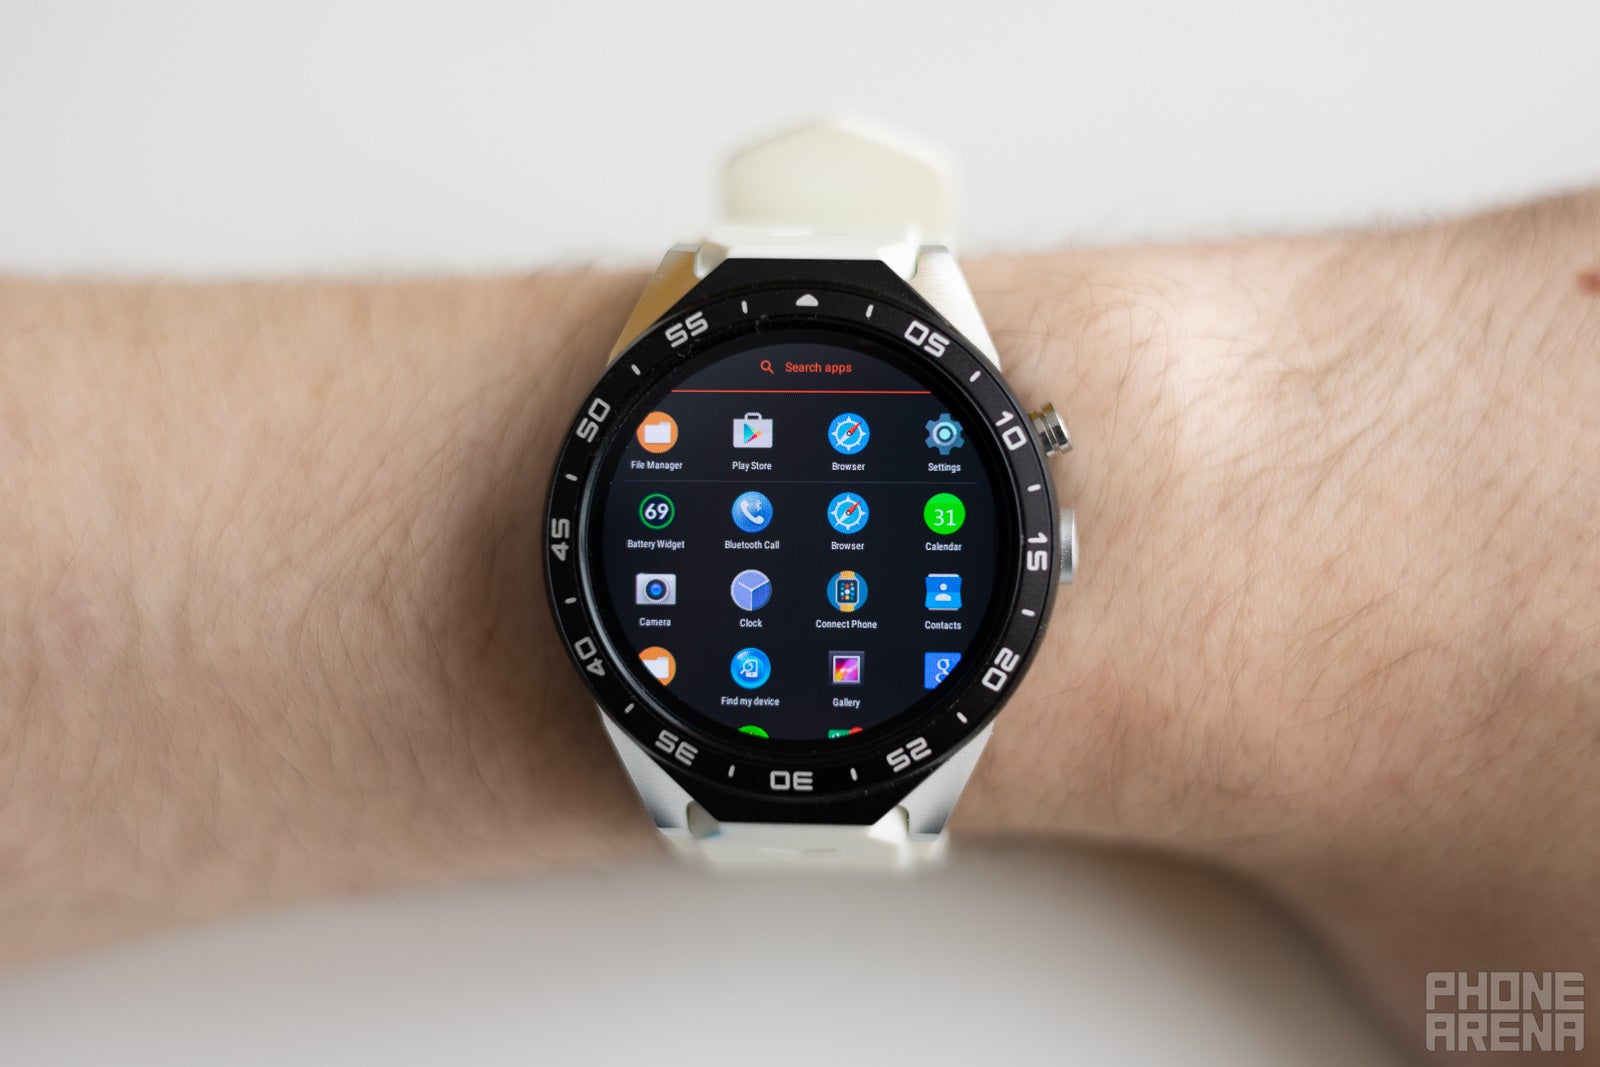 Nothing beats the Galaxy Watch with impressive rival that costs £69